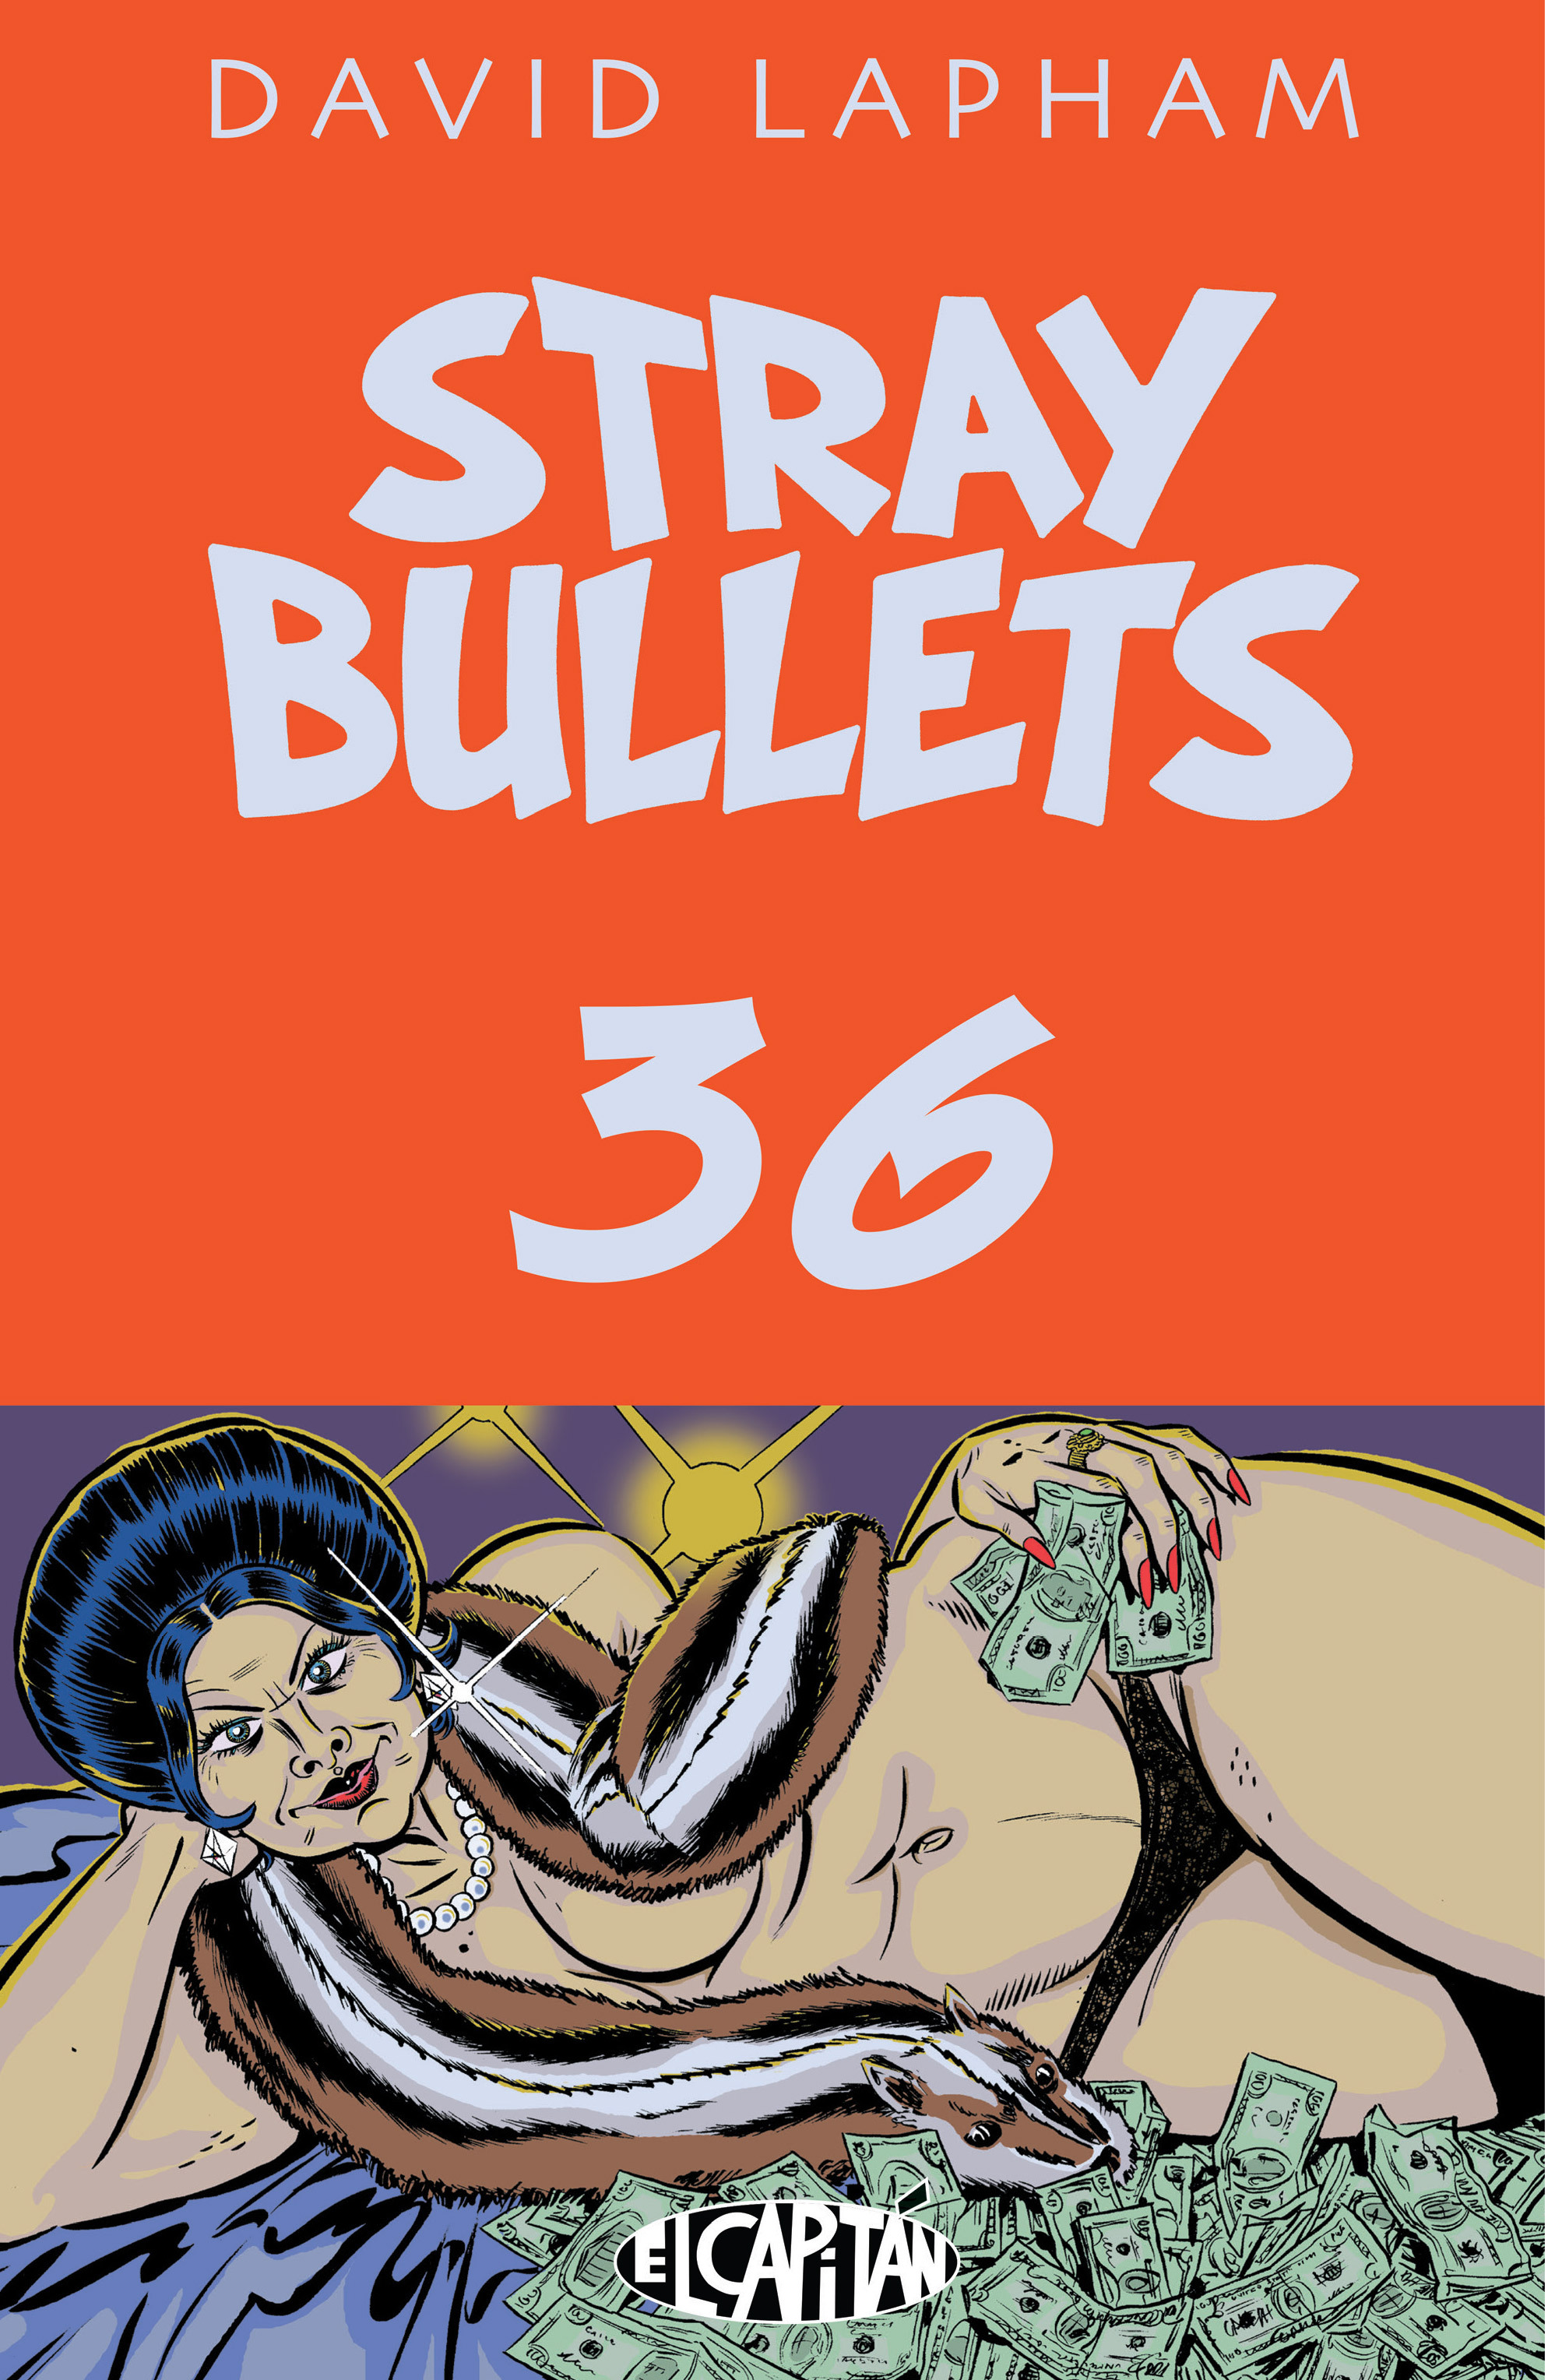 Read online Stray Bullets comic -  Issue #36 - 1